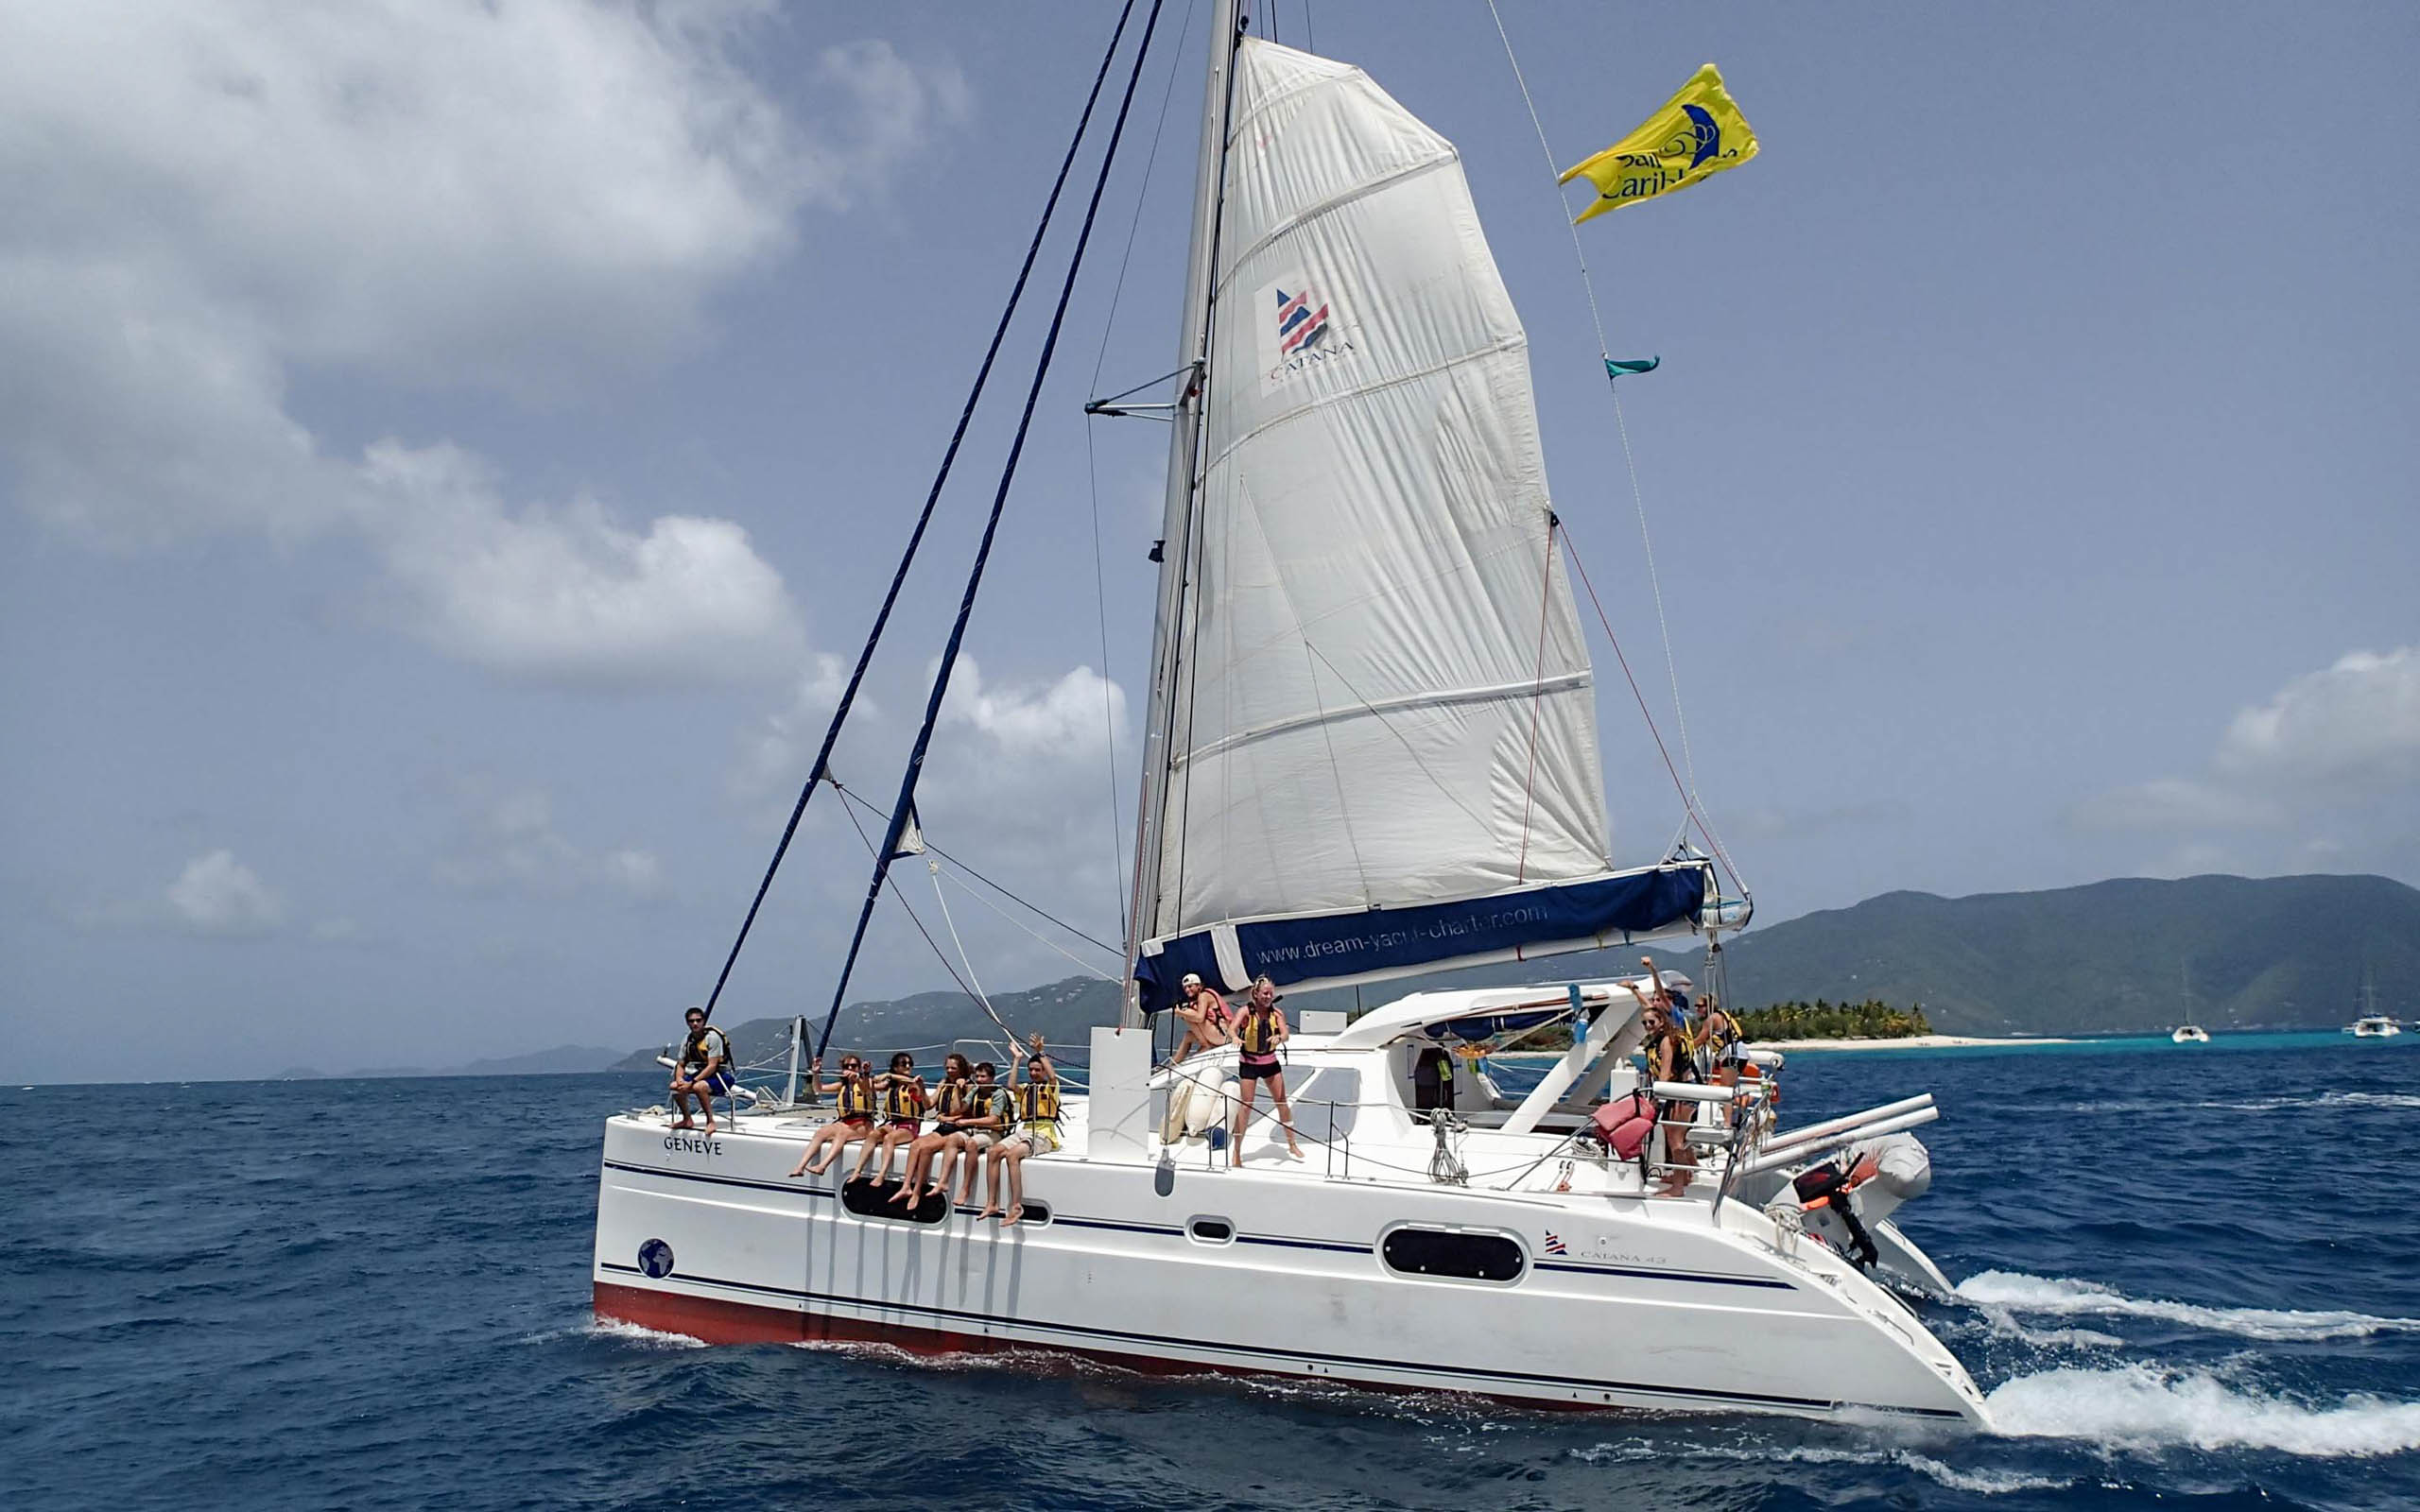 A group of people on a white catamaran in the ocean.